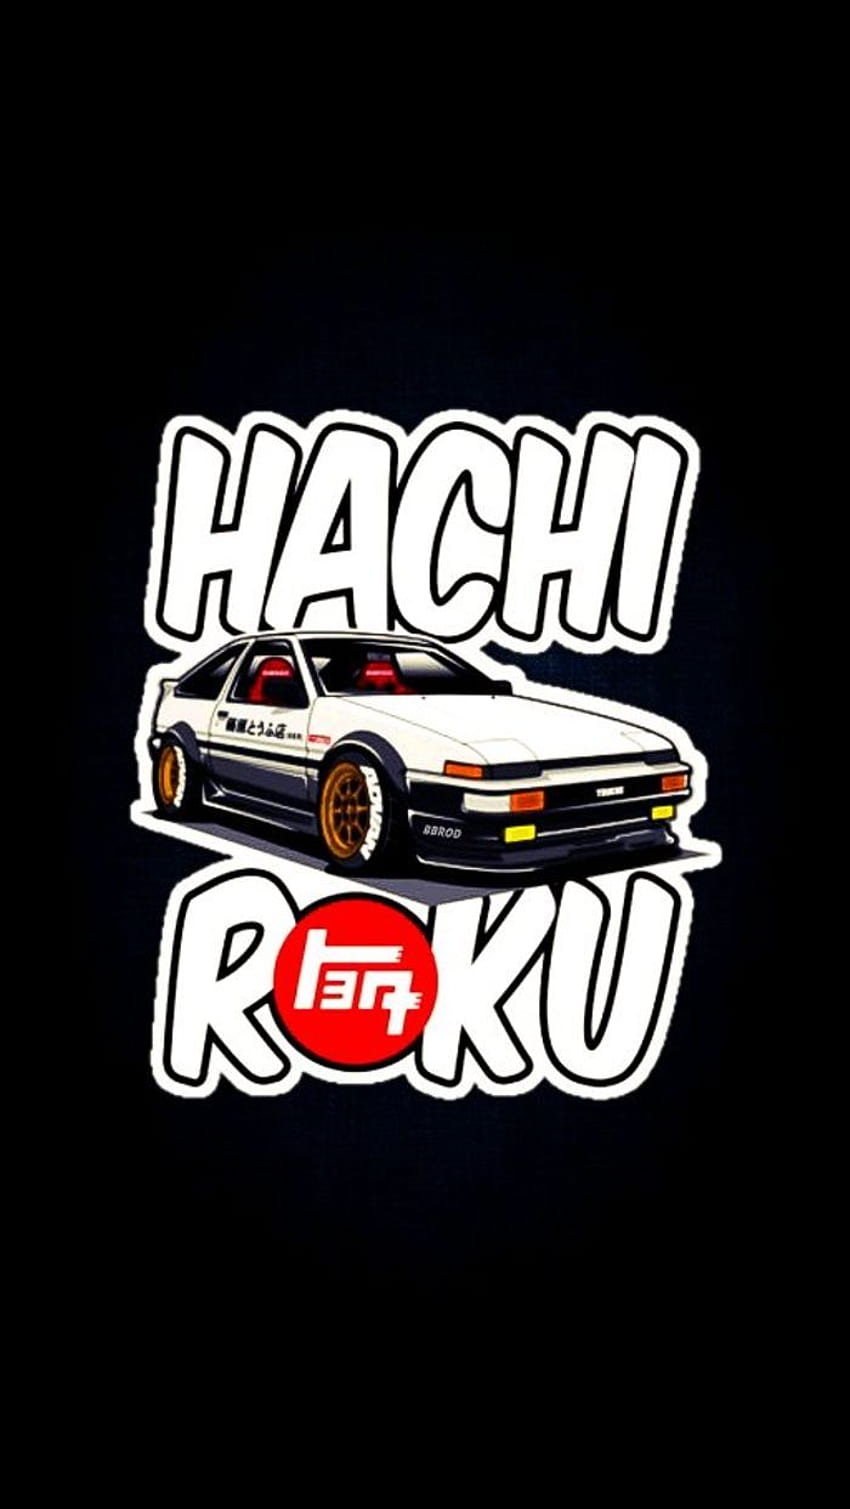 My edited version of the Hachi Roku to suit AMOLED screens better, of if you just prefer darker background. IMG 1 is edited IMG 2 is the original, Amoled Car HD phone wallpaper